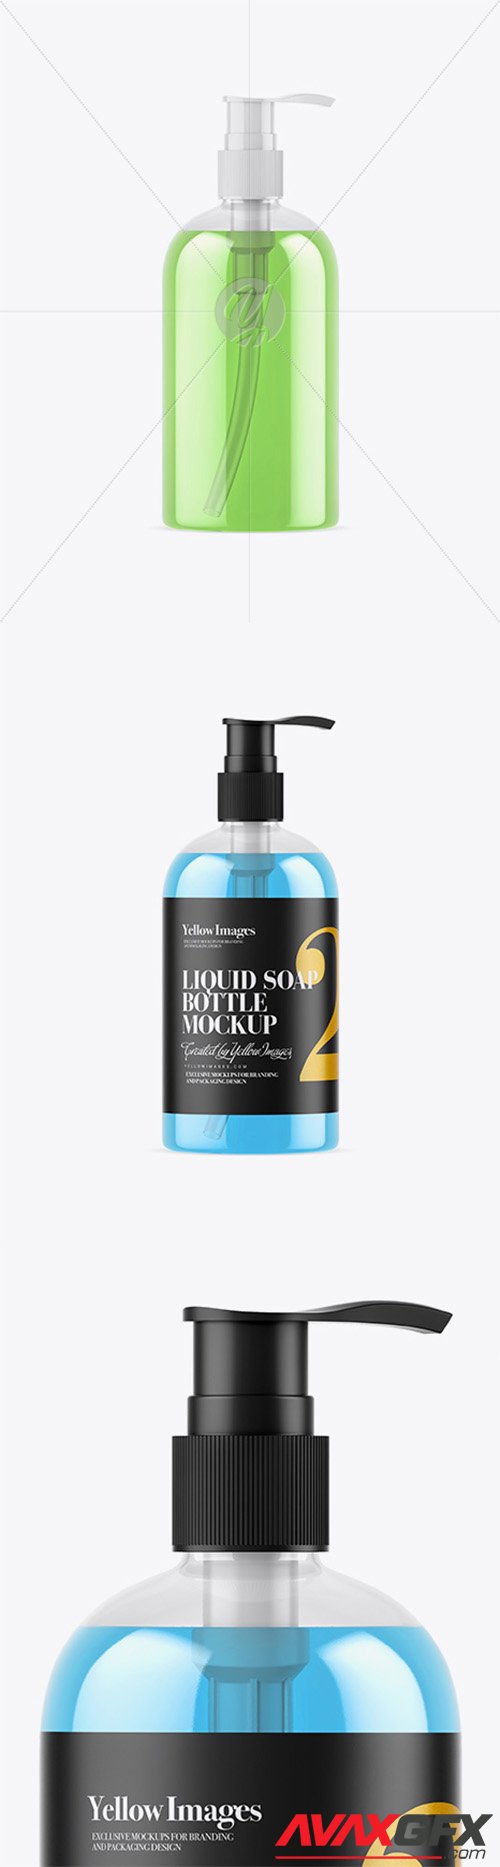 Clear Bottle with Liquid Soap Mockup 31314